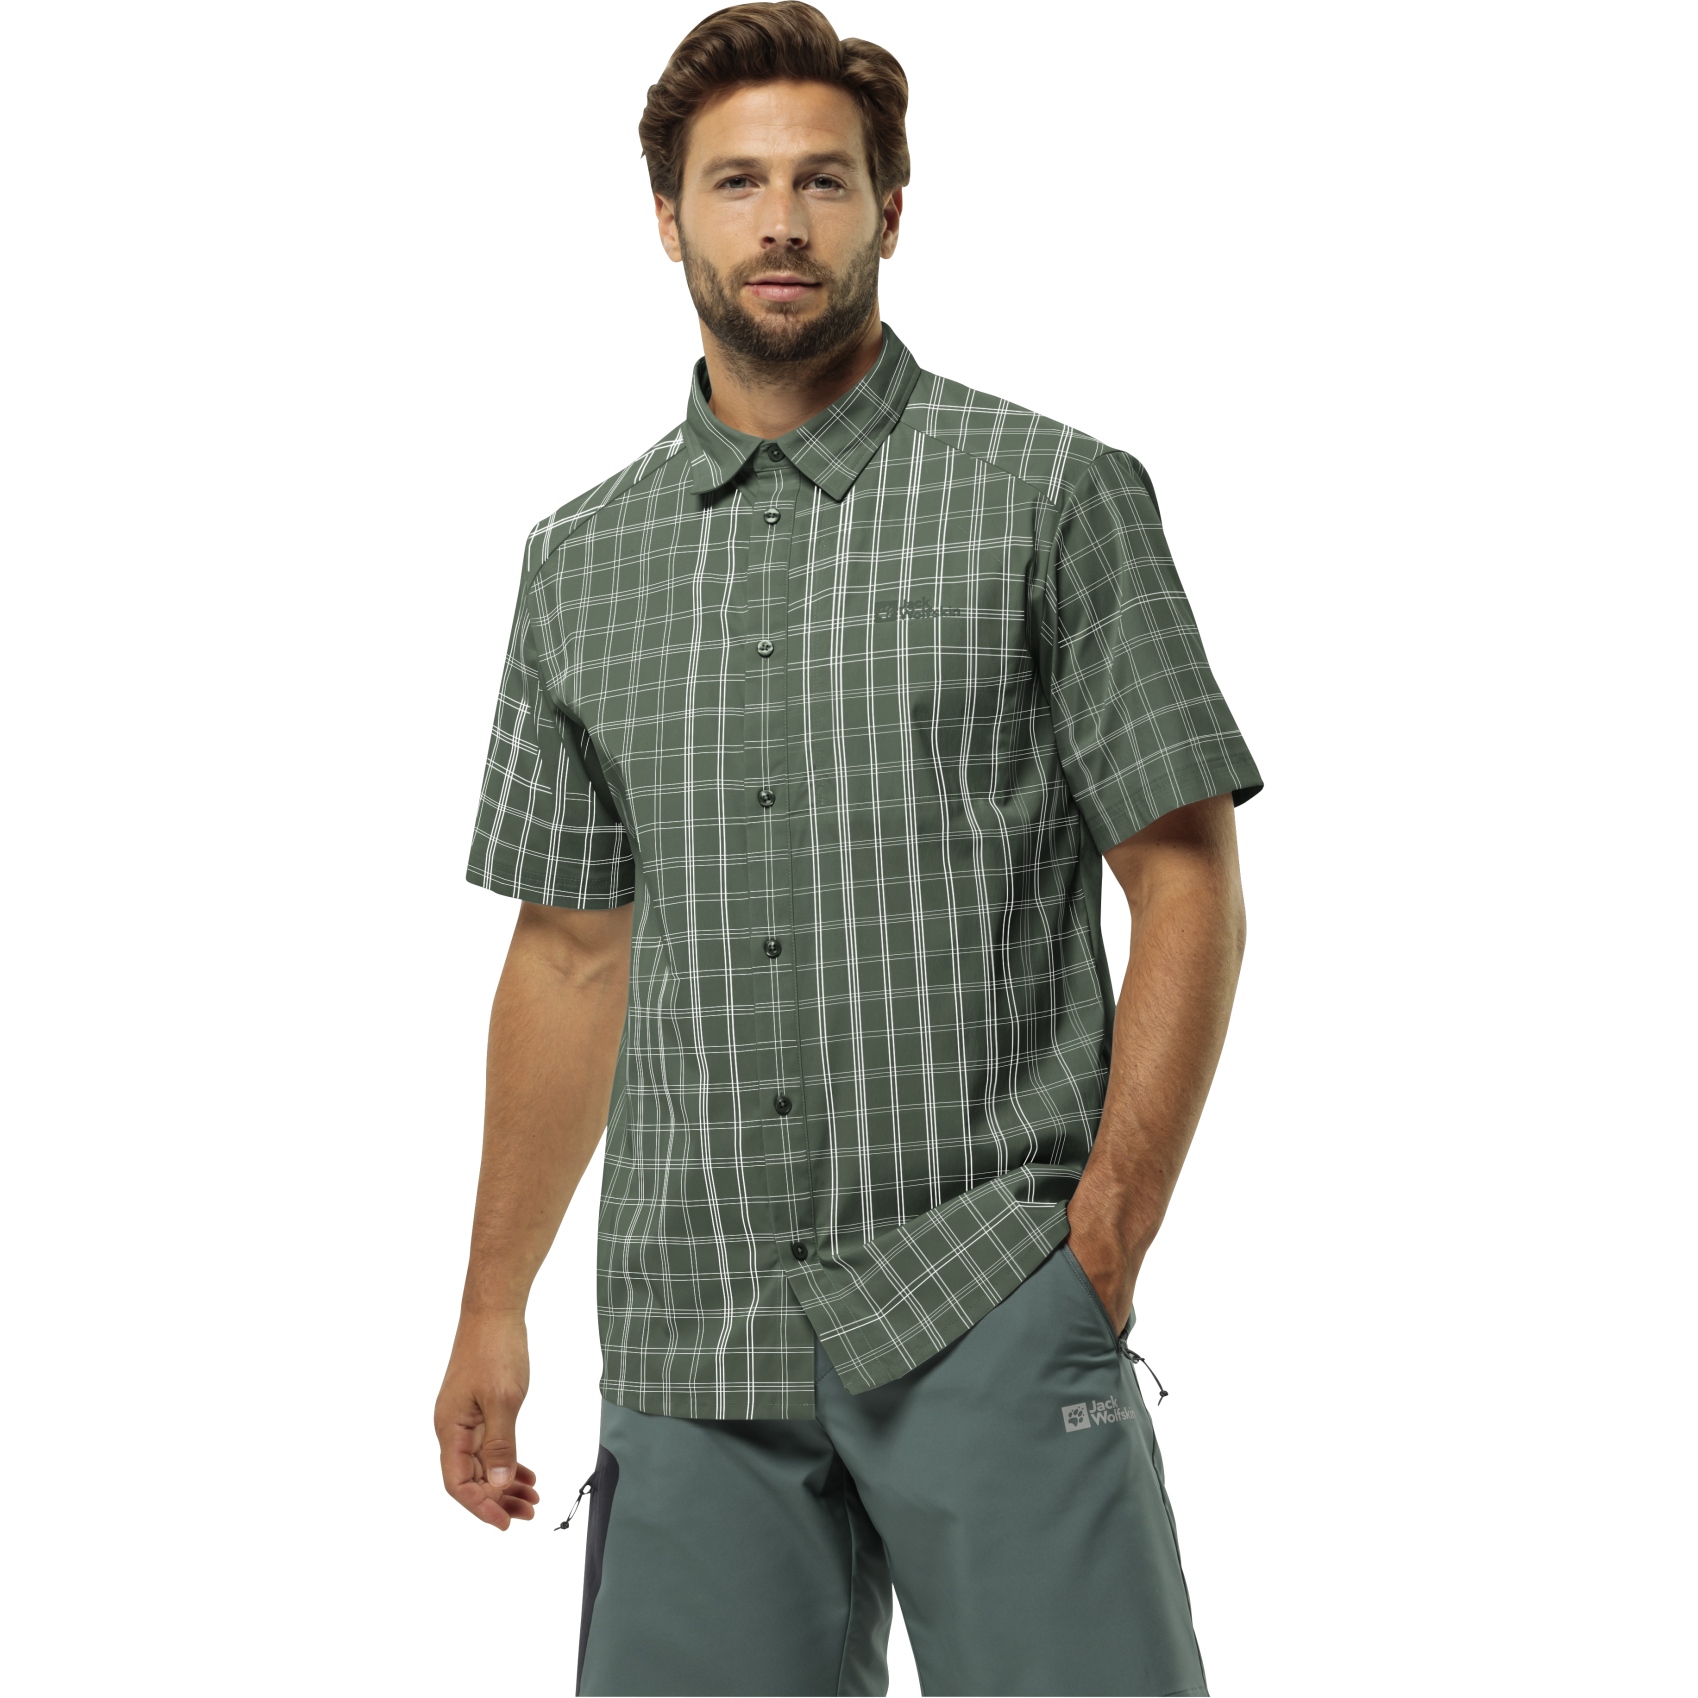 Picture of Jack Wolfskin Norbo Short Sleeve Shirt Men - hedge green checks